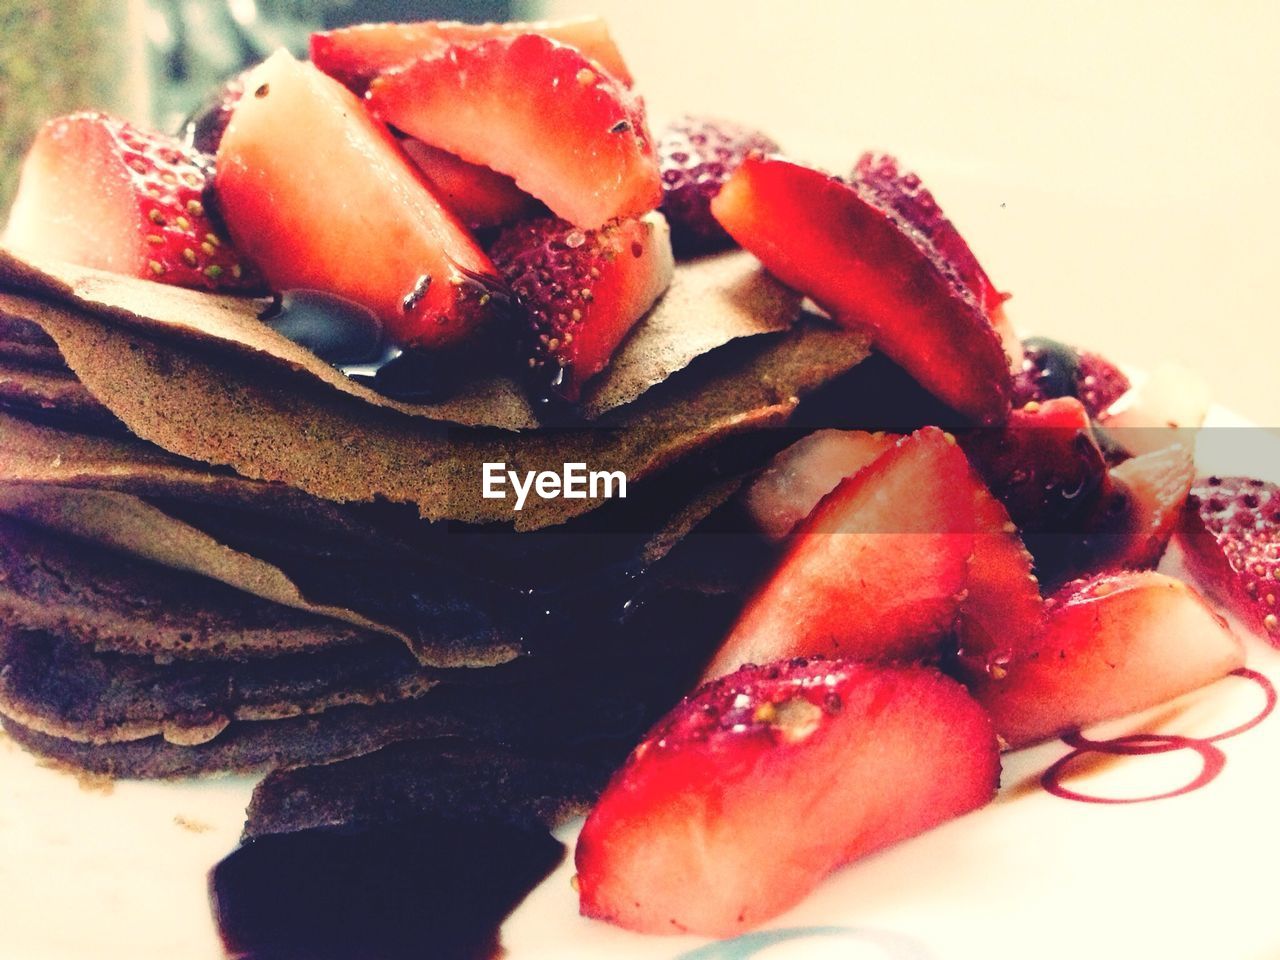 Pancakes topped with chocolate and strawberries